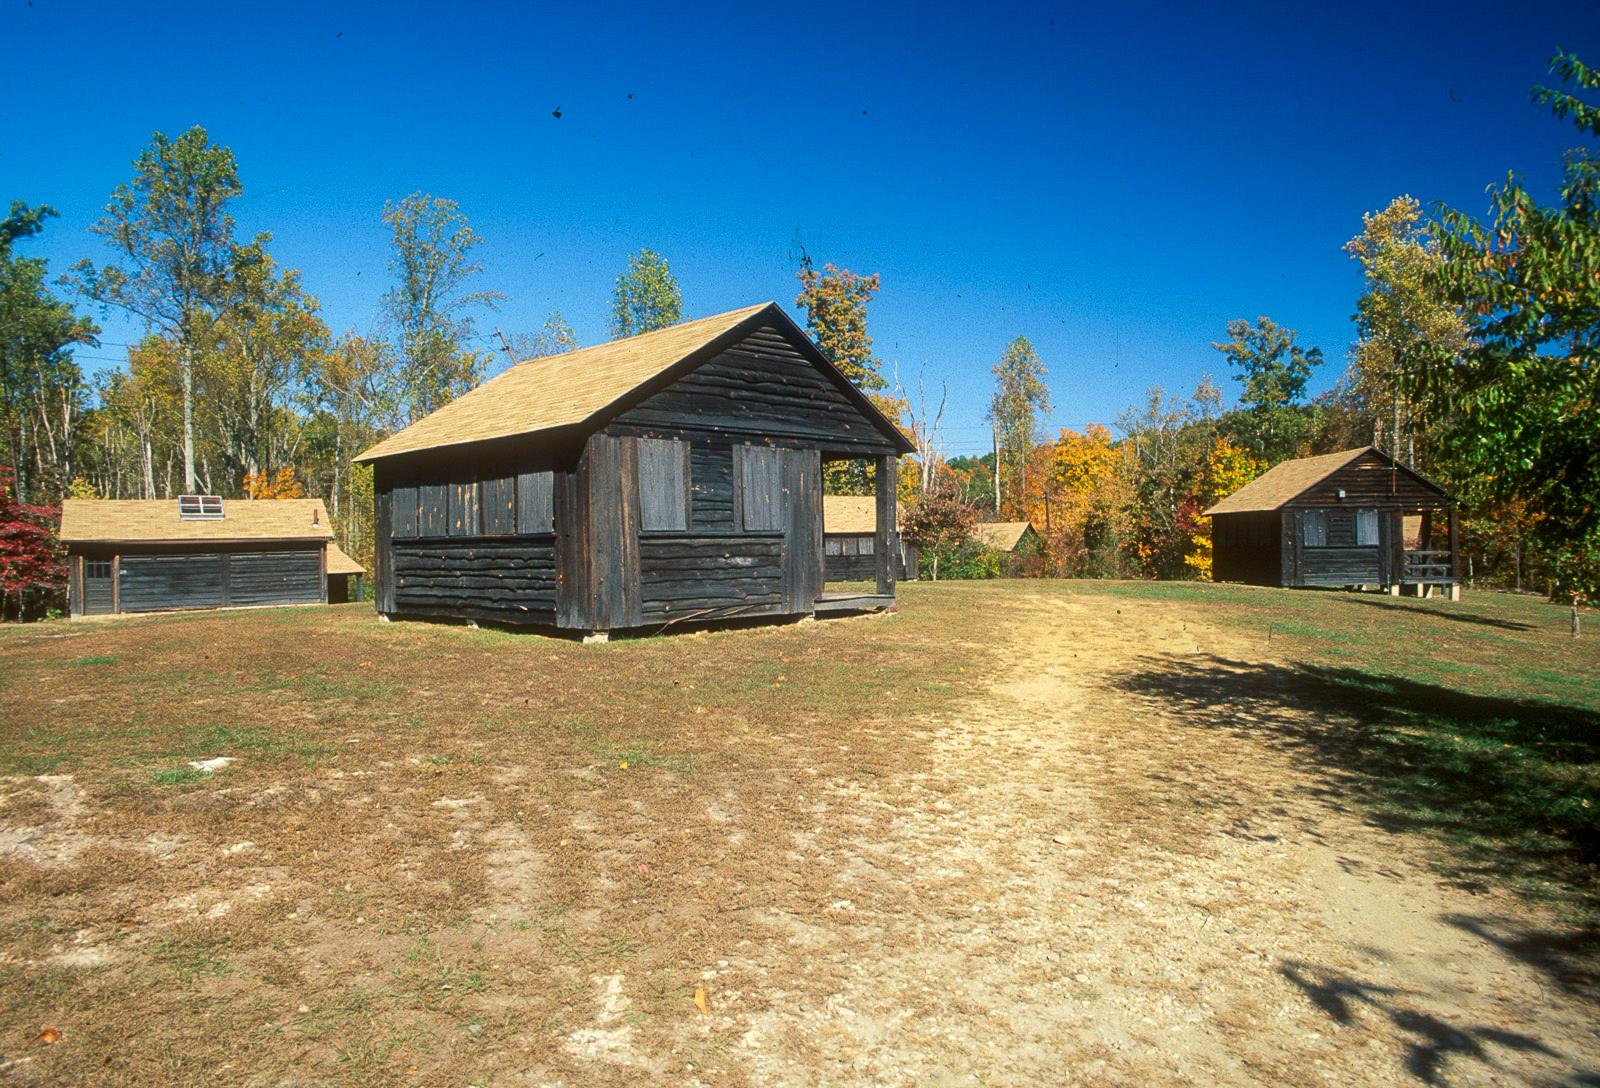 A wooden, dark brown sleeping cabin sits in a field. Behind it are other cabins and trees.